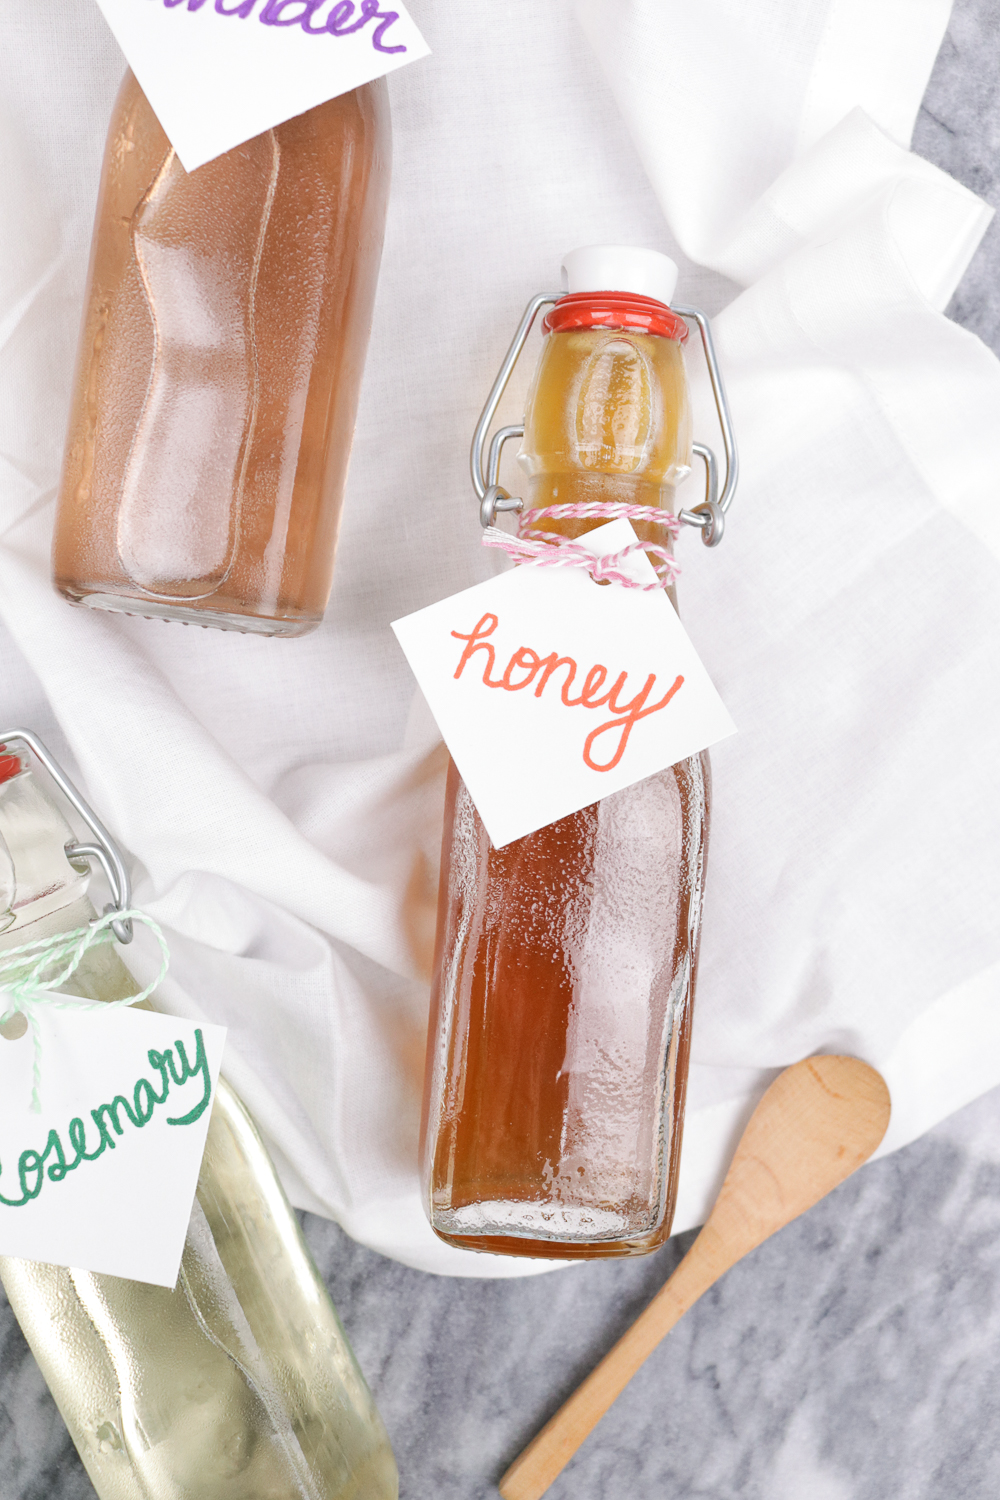 3 Simple Syrup Recipes to Keep Stocked: Rosemary, Honey and Lavender